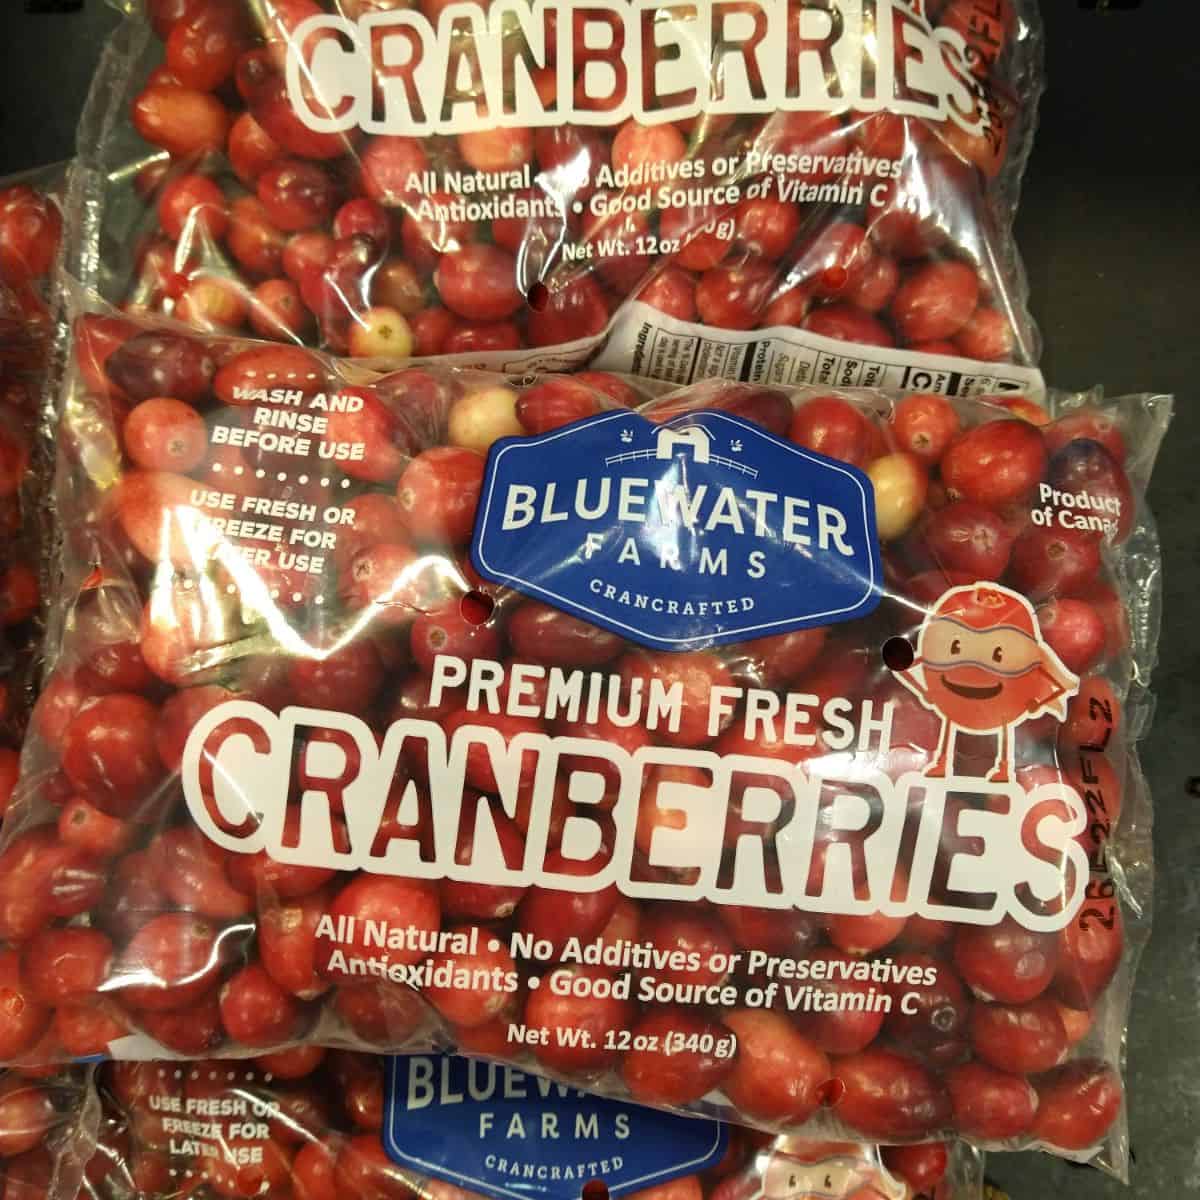 Bags of Bluewater Farms Fresh Cranberries at the store.